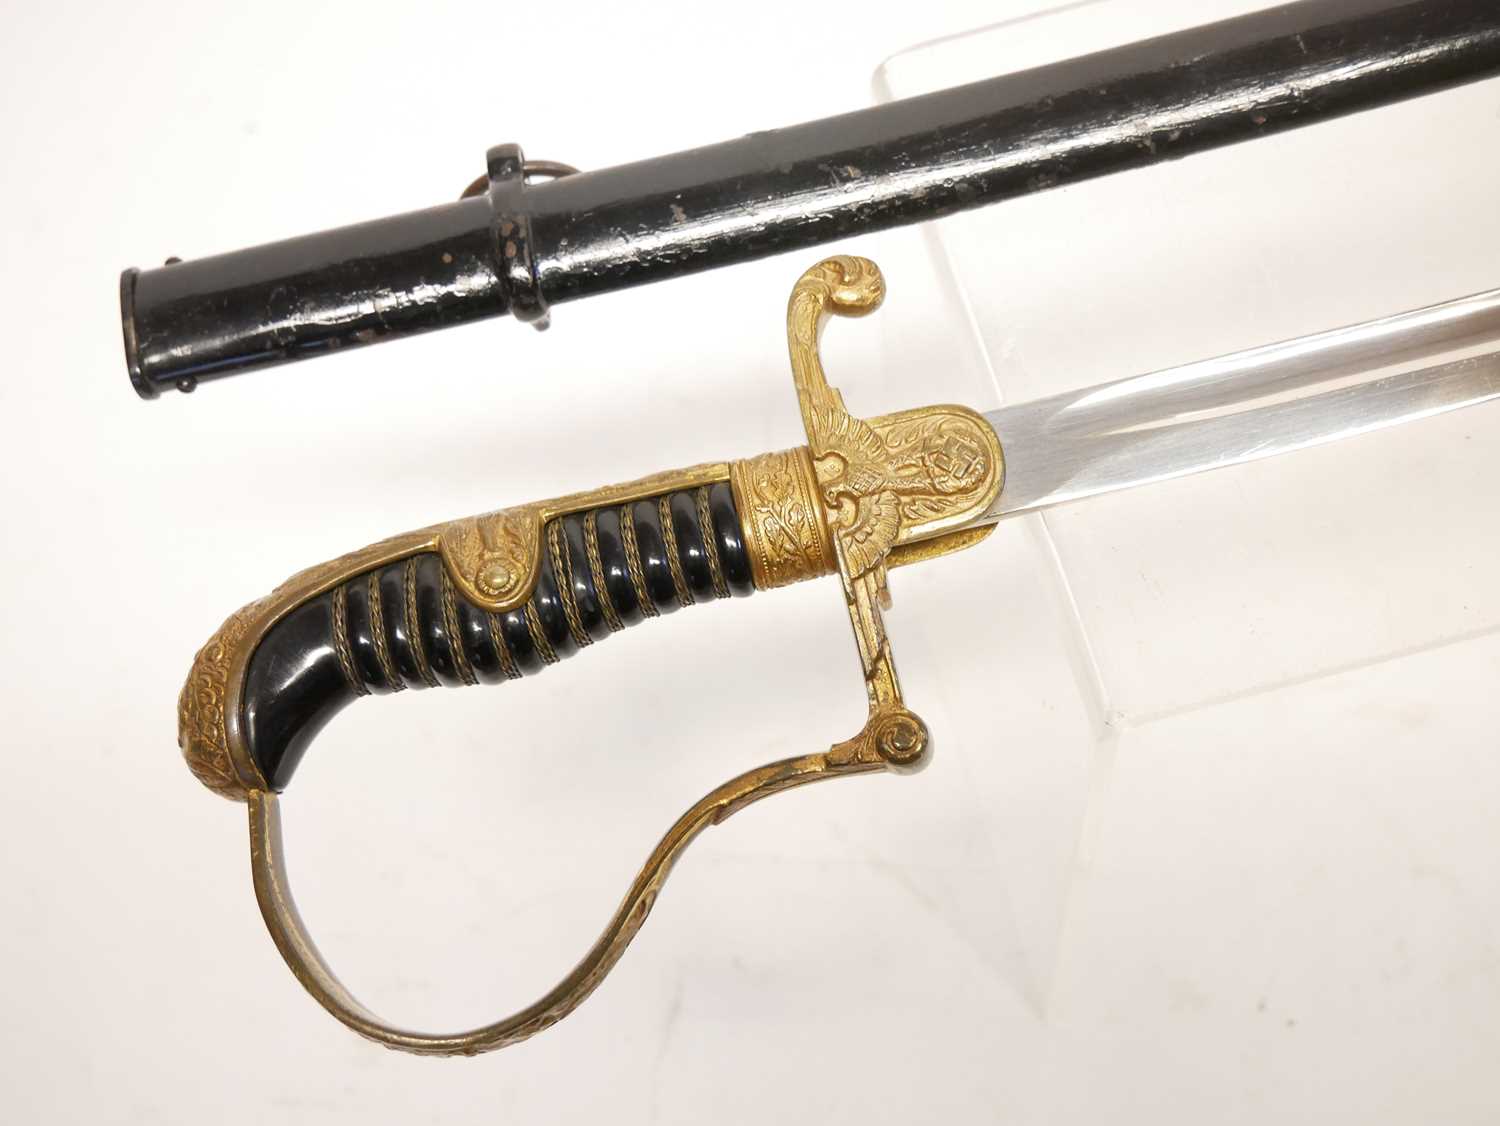 German Third Reich army officer's sword, by W.K.C. Solingen (Weyersberg, Kirschbaum and Co.) with - Image 2 of 11